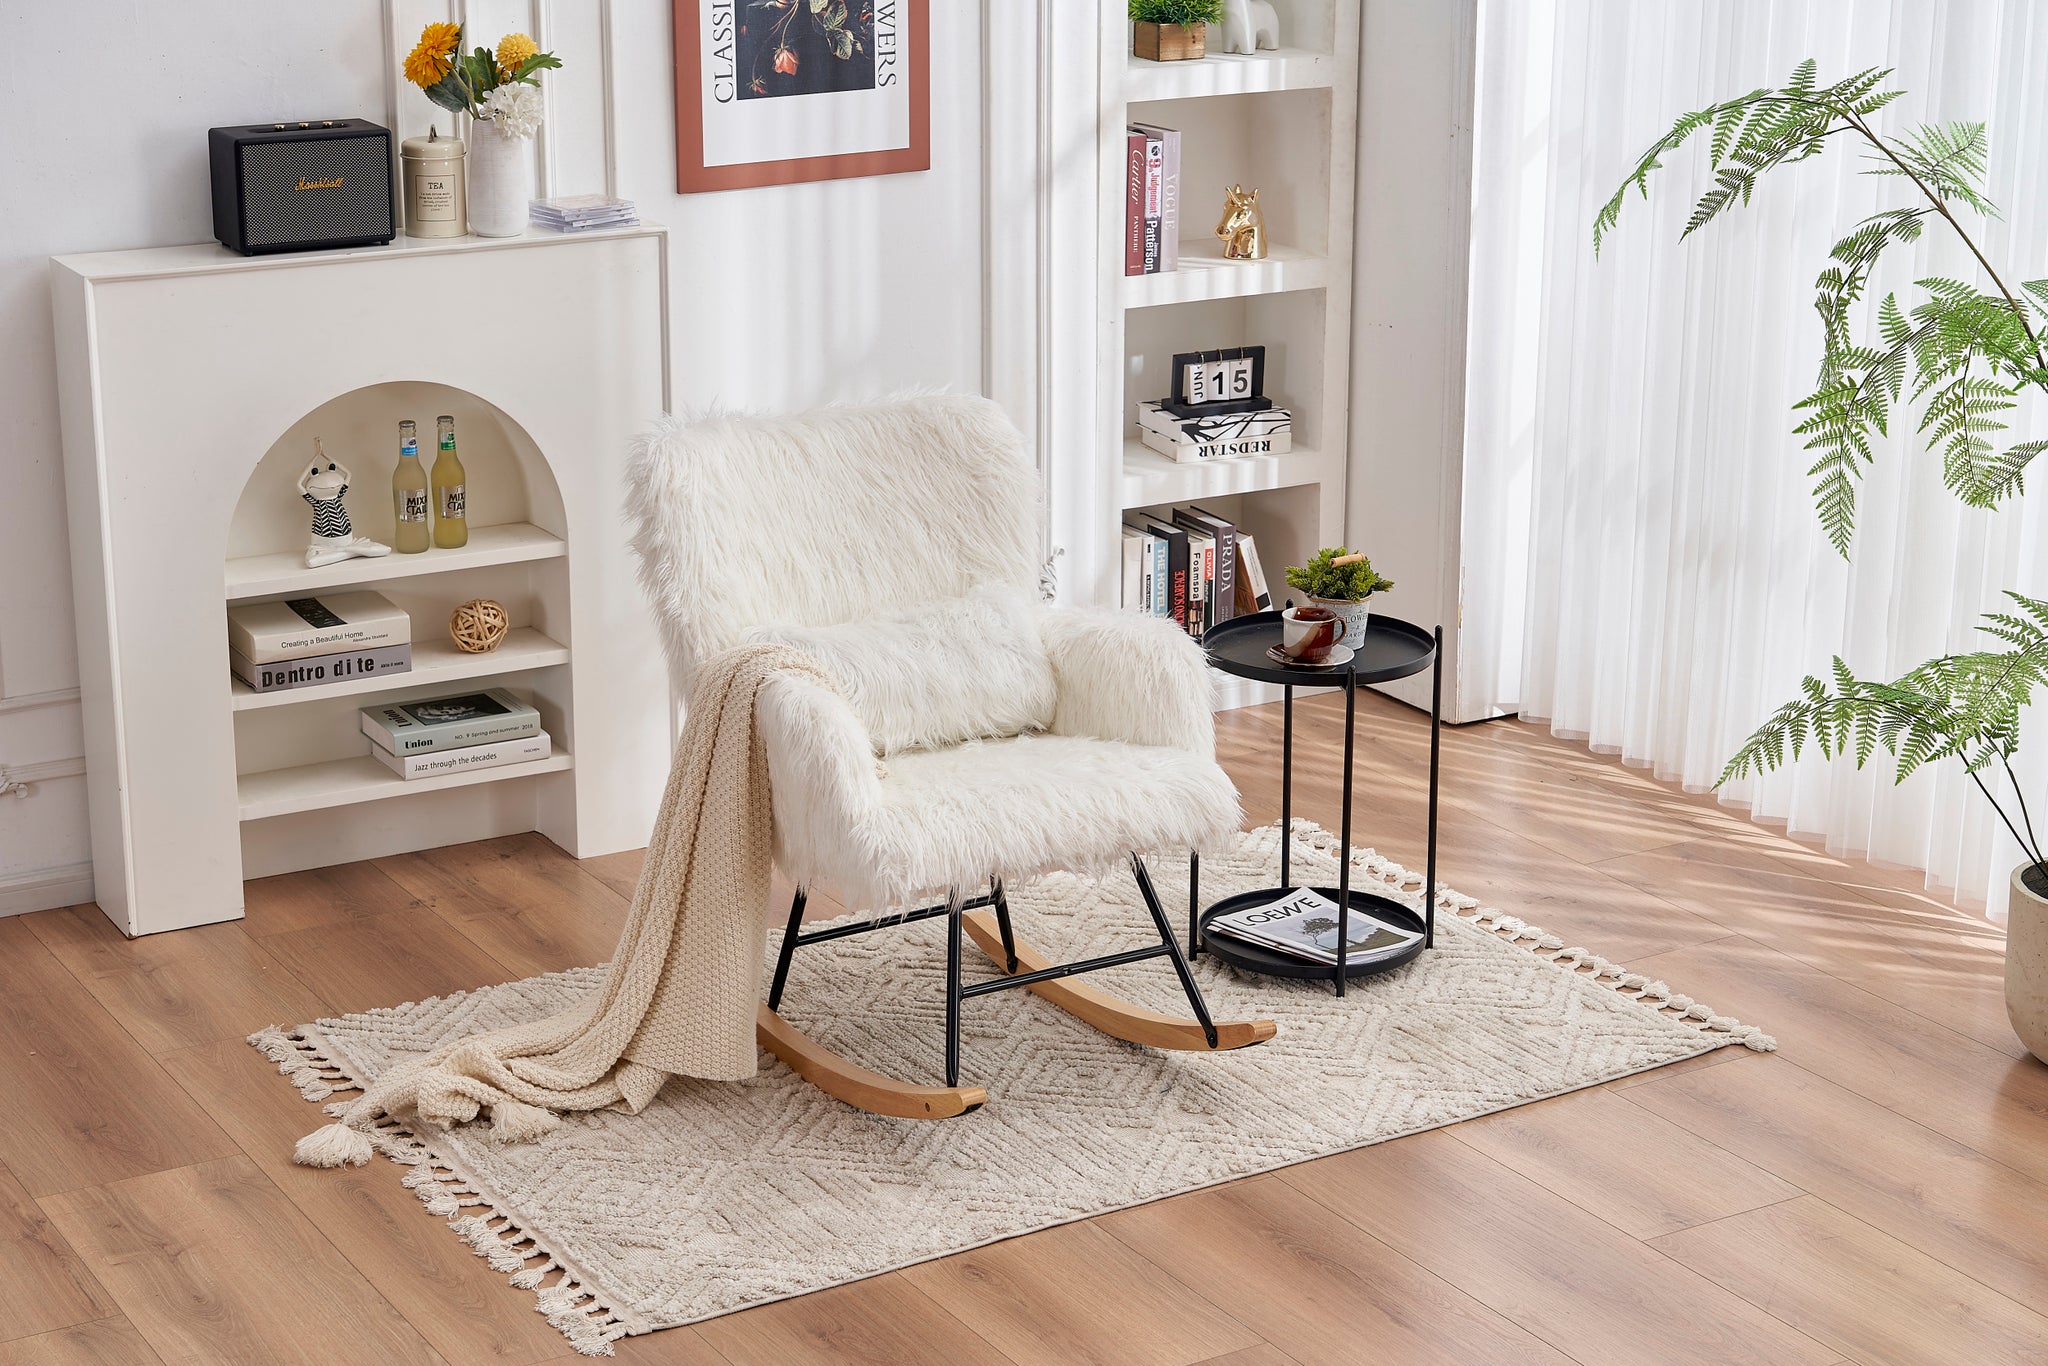 Rocking Chair Nursery, Solid Wood Legs Reading Chair white-primary living space-sponge-modern-rocking